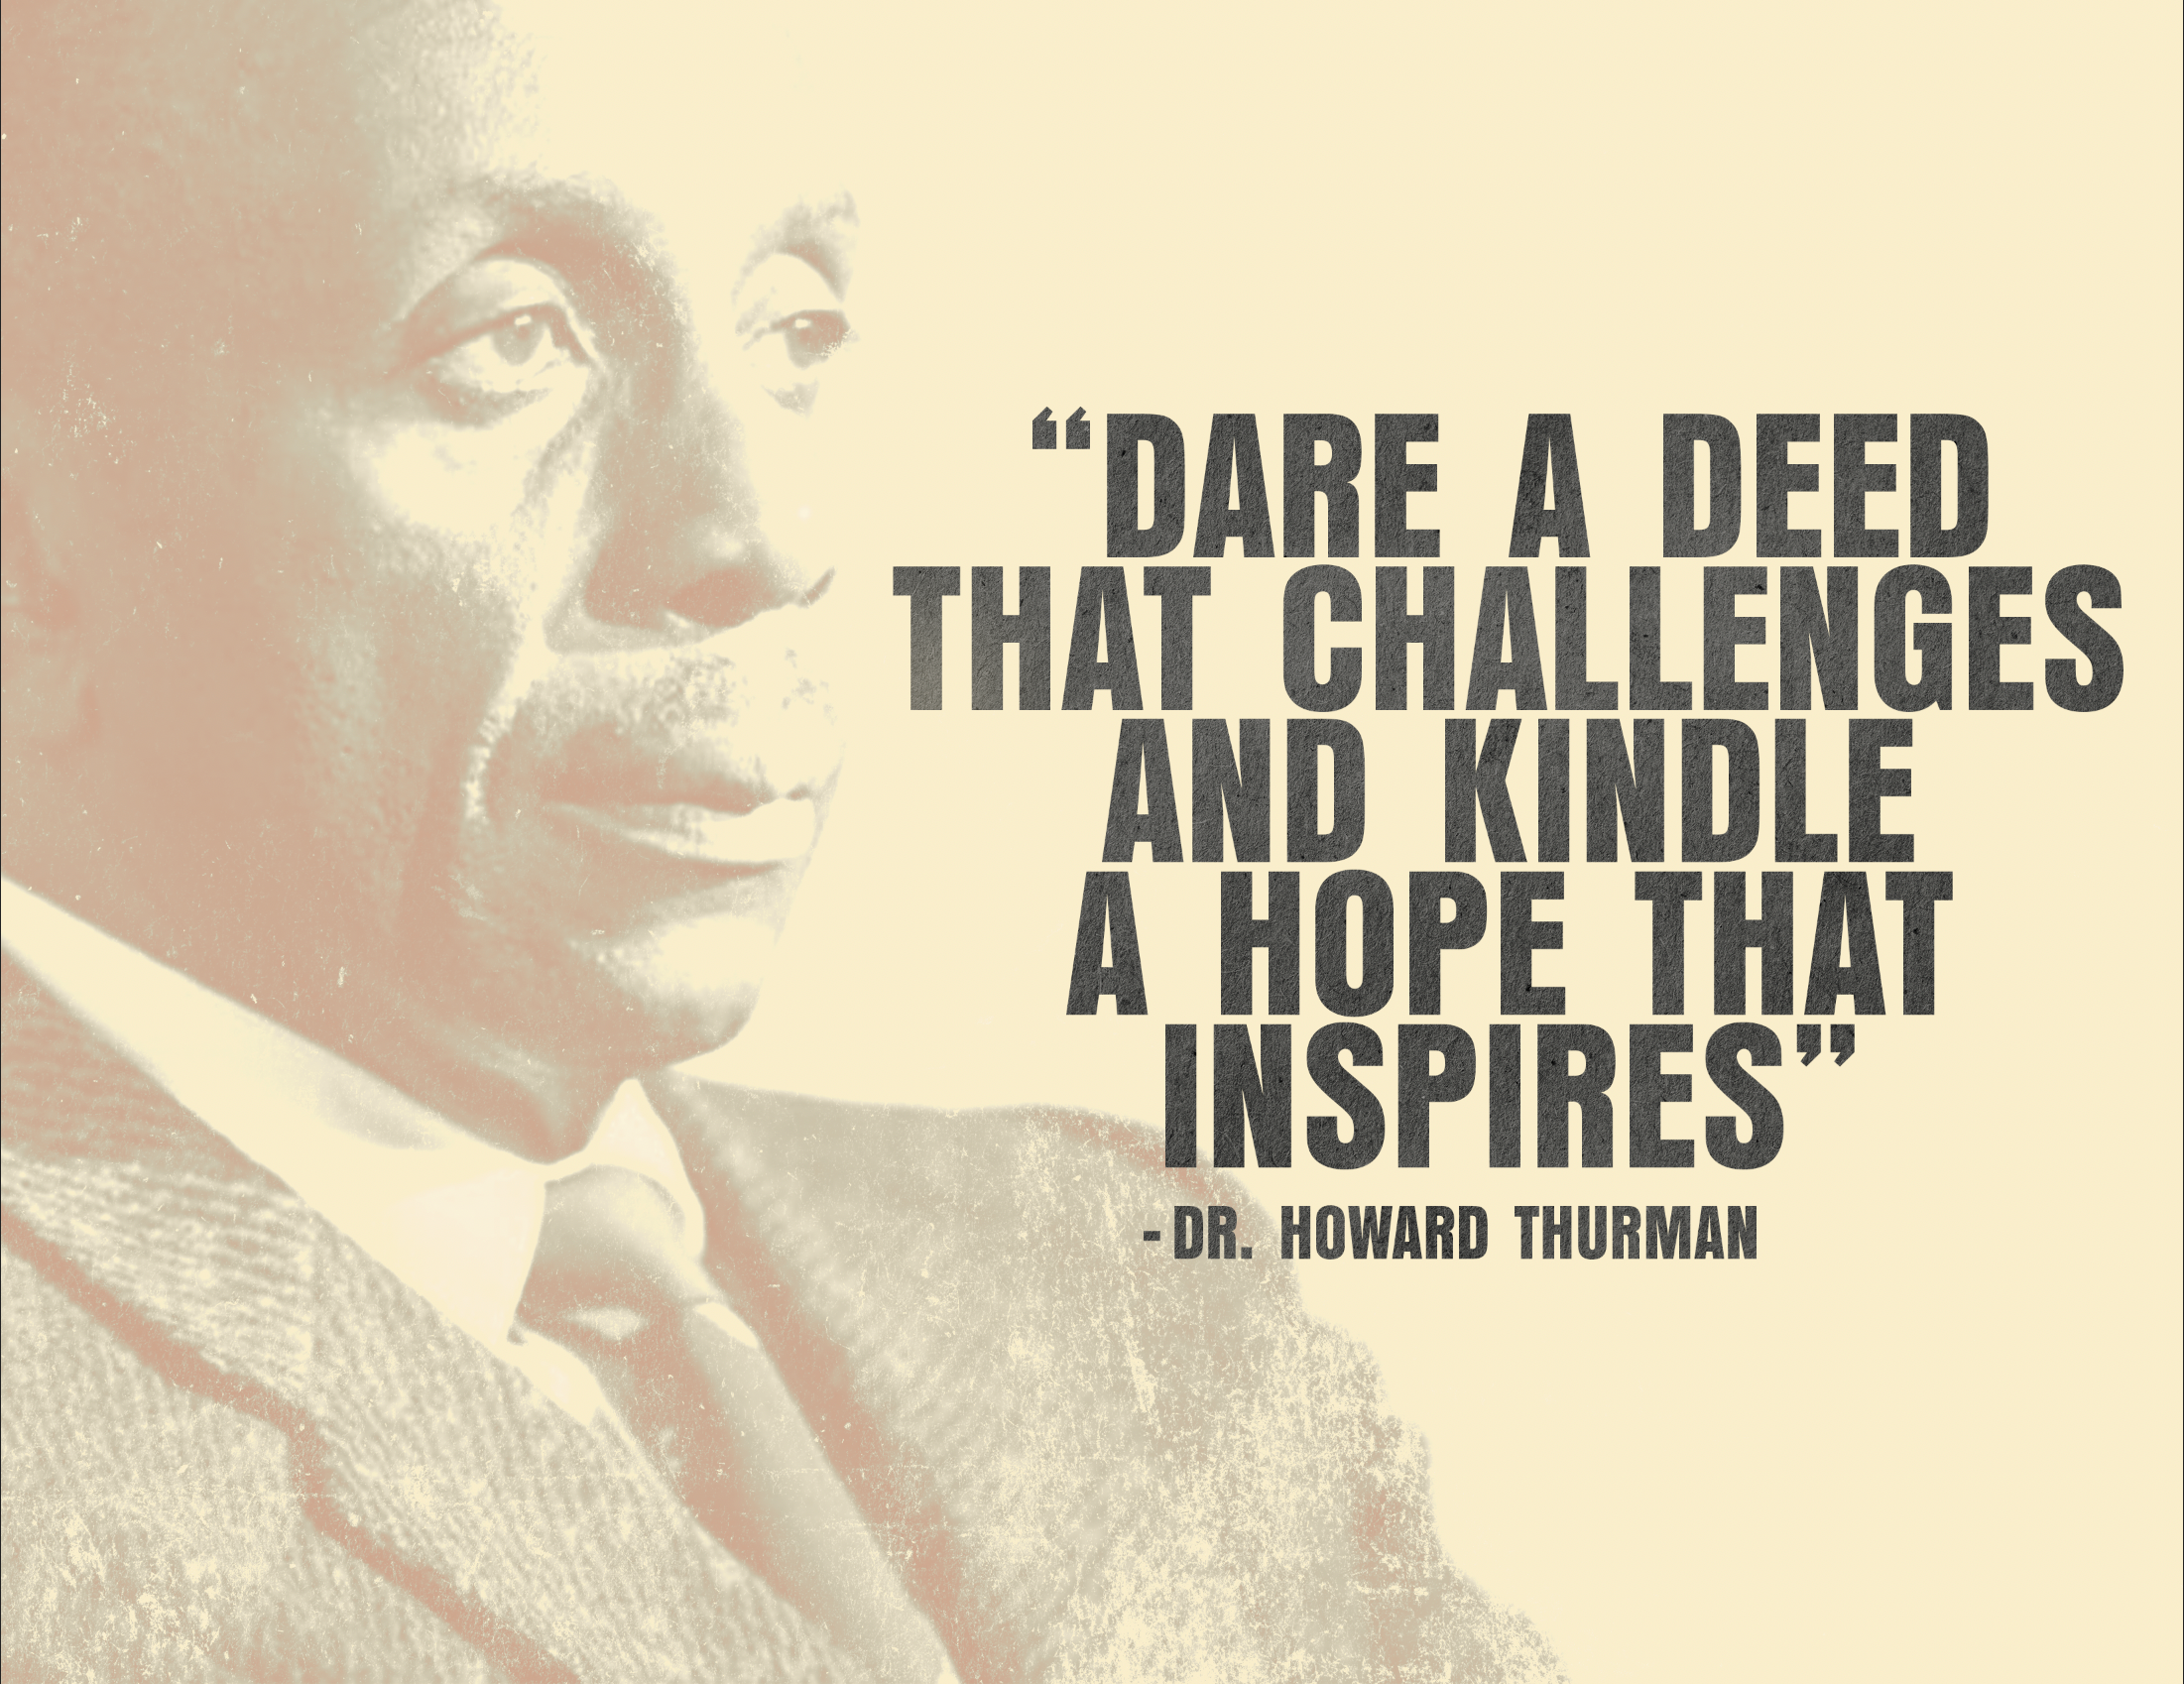 Howard Thurman image and quote